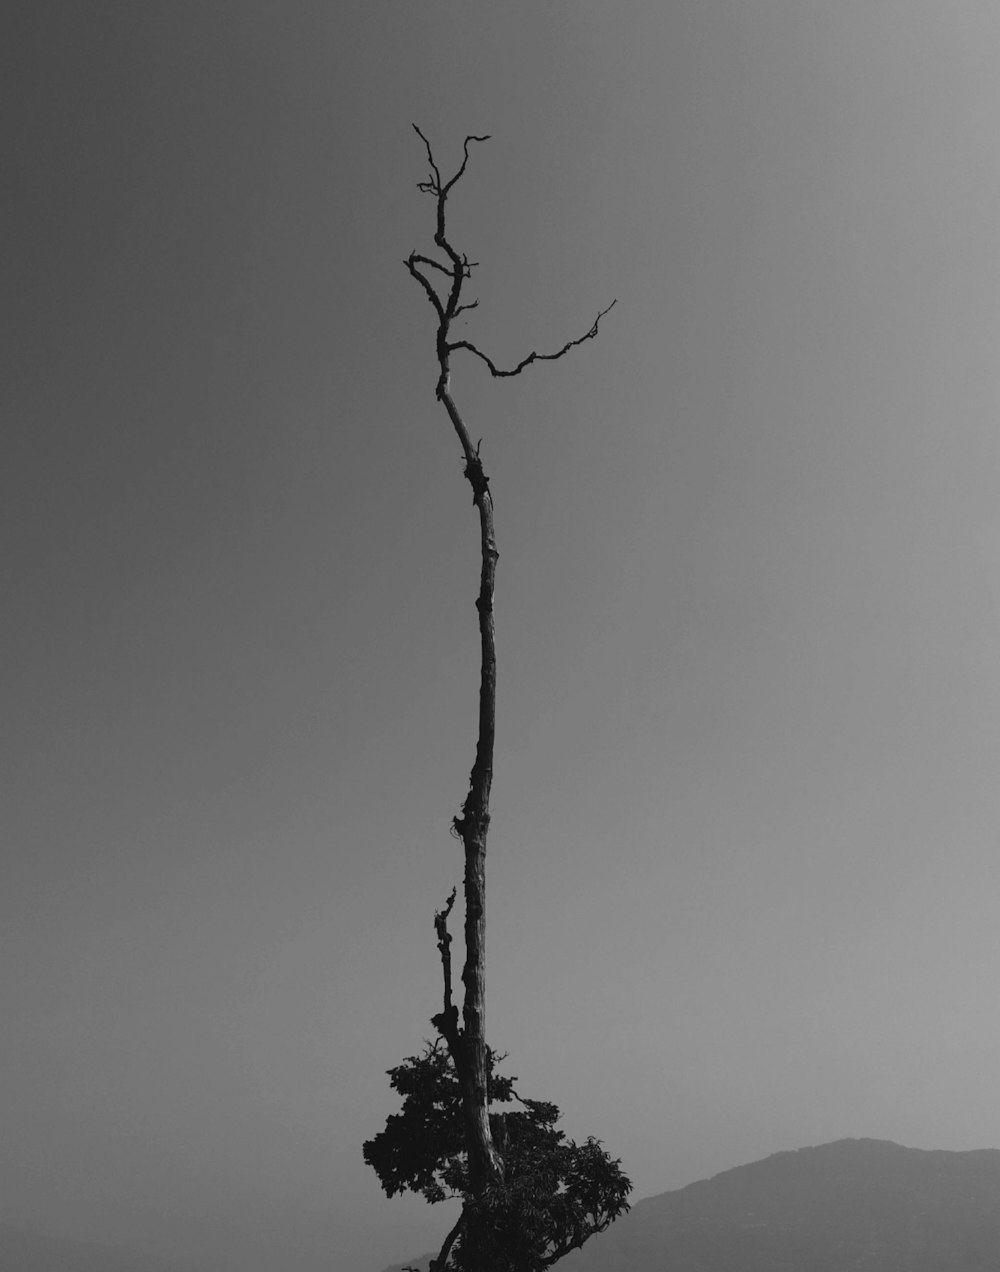 a black and white photo of a lone tree